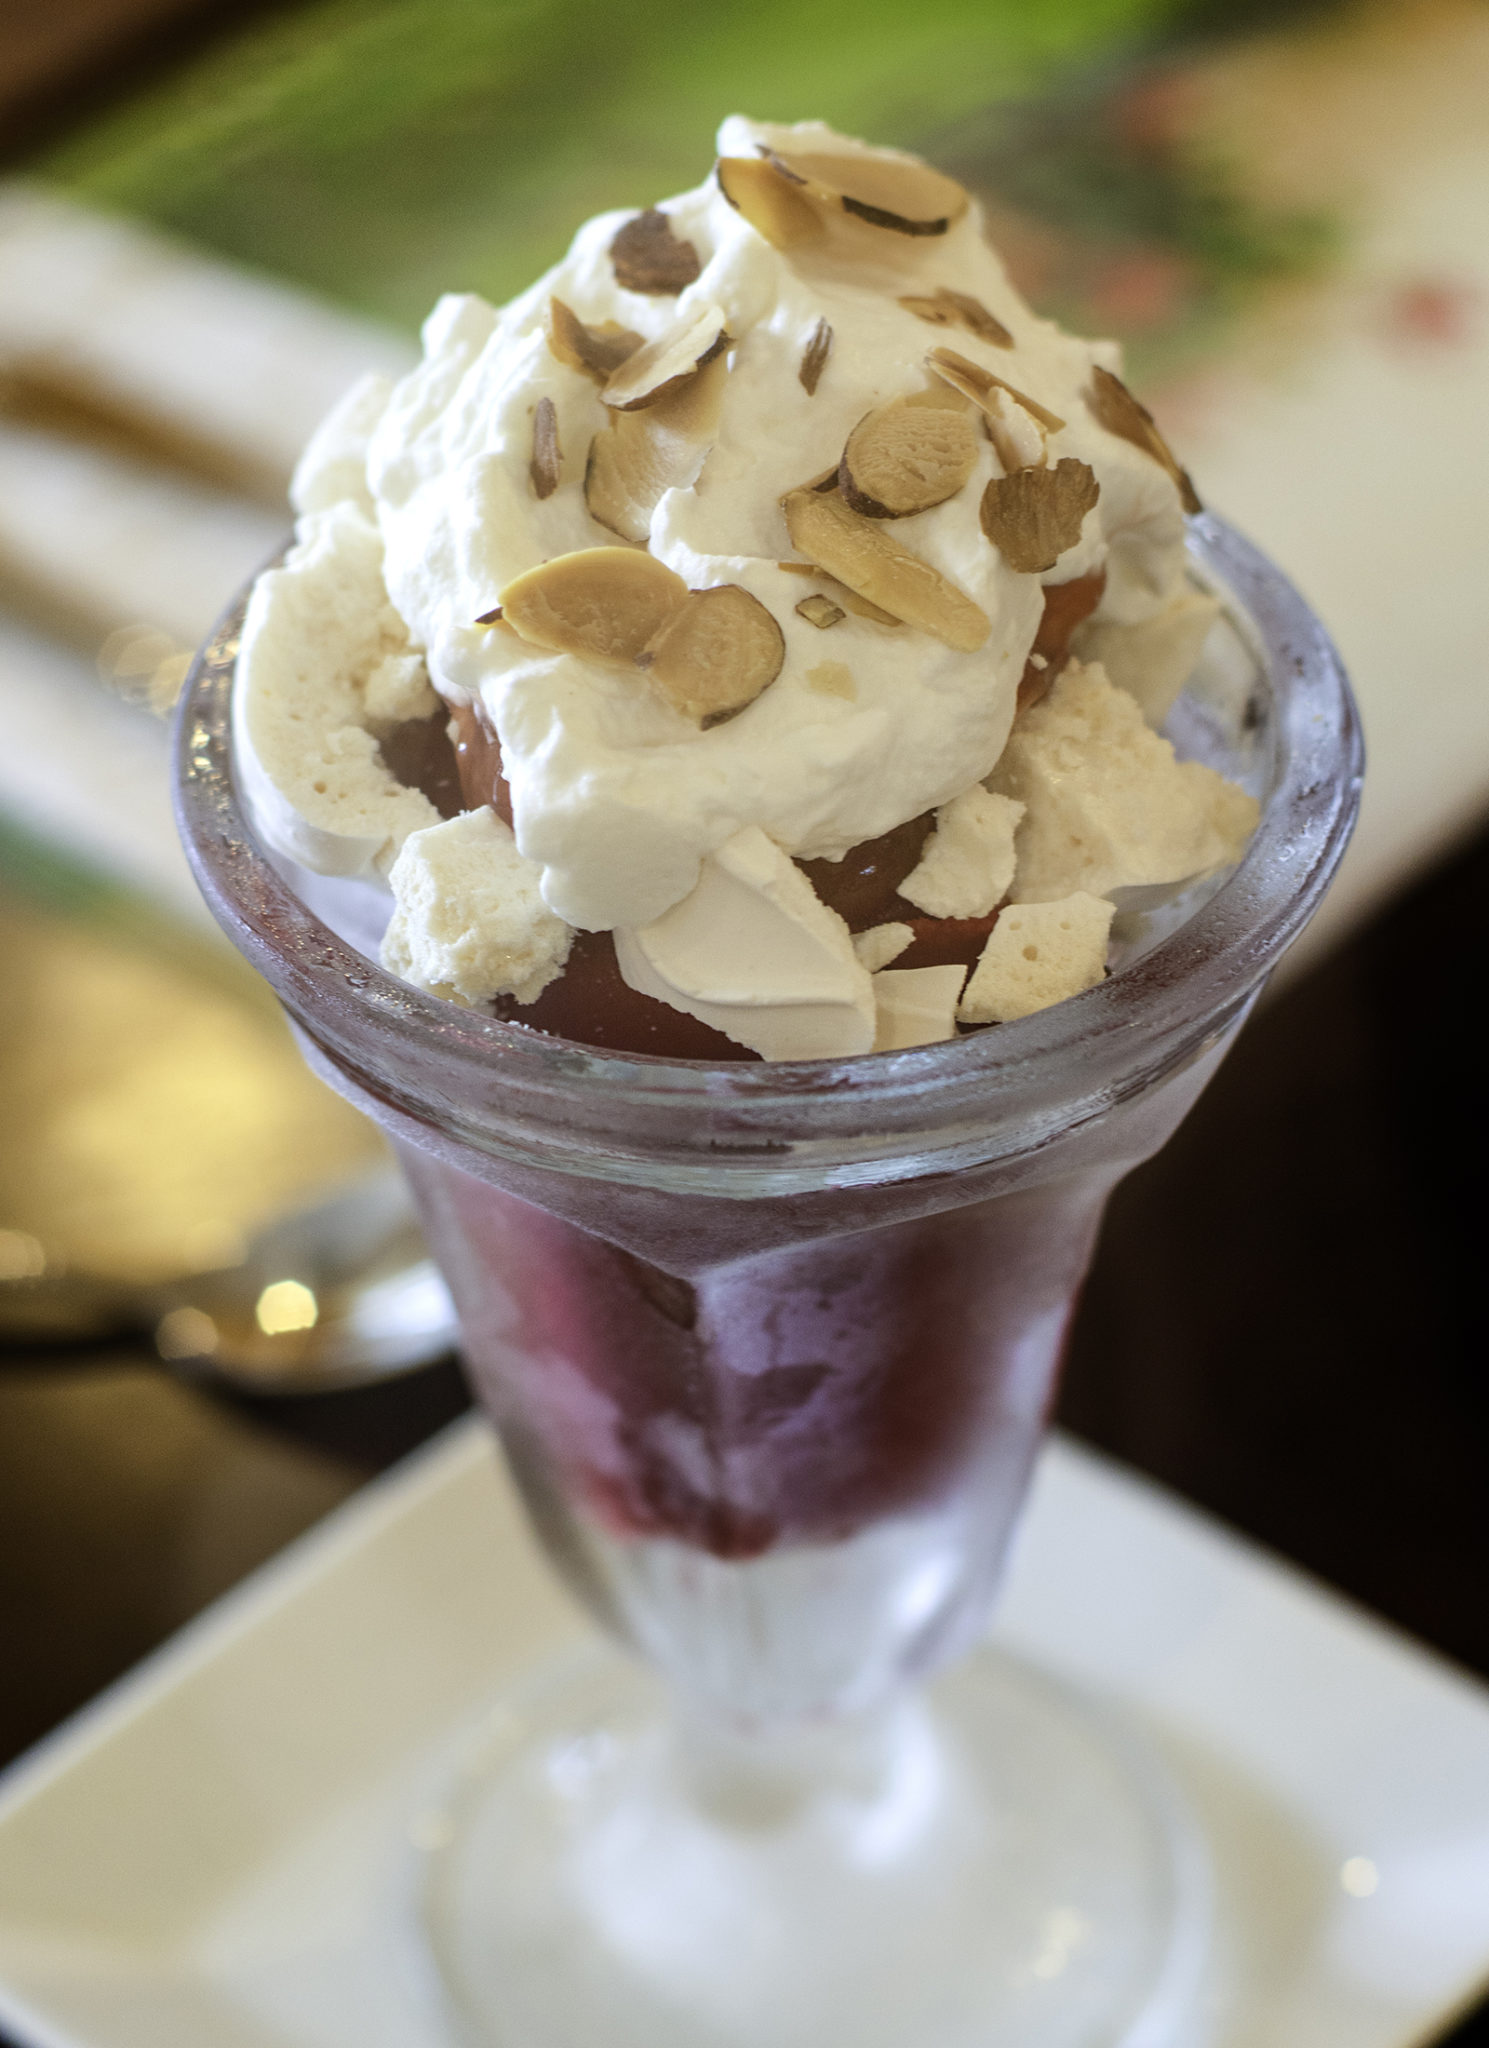 Vacherin: Raspberry sorbet with vanilla meringue, berry jam, toasted almonds and Chantilly cream at Creperie Chez Solange in Larkfield. Heather Irwin/PD